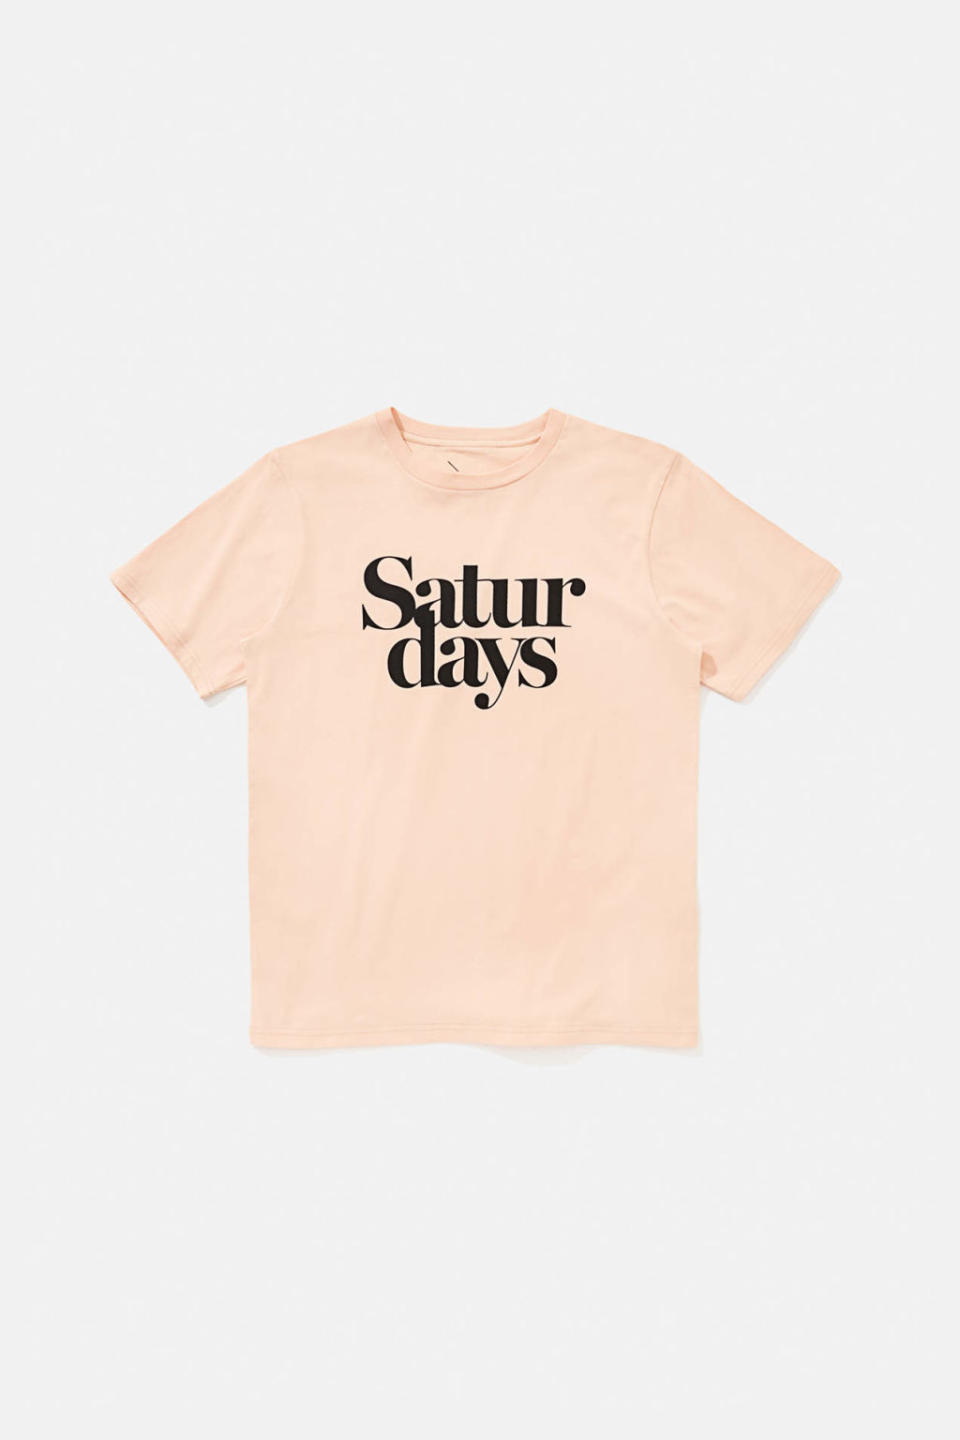 Because the best day of the week deserves its own shirt.